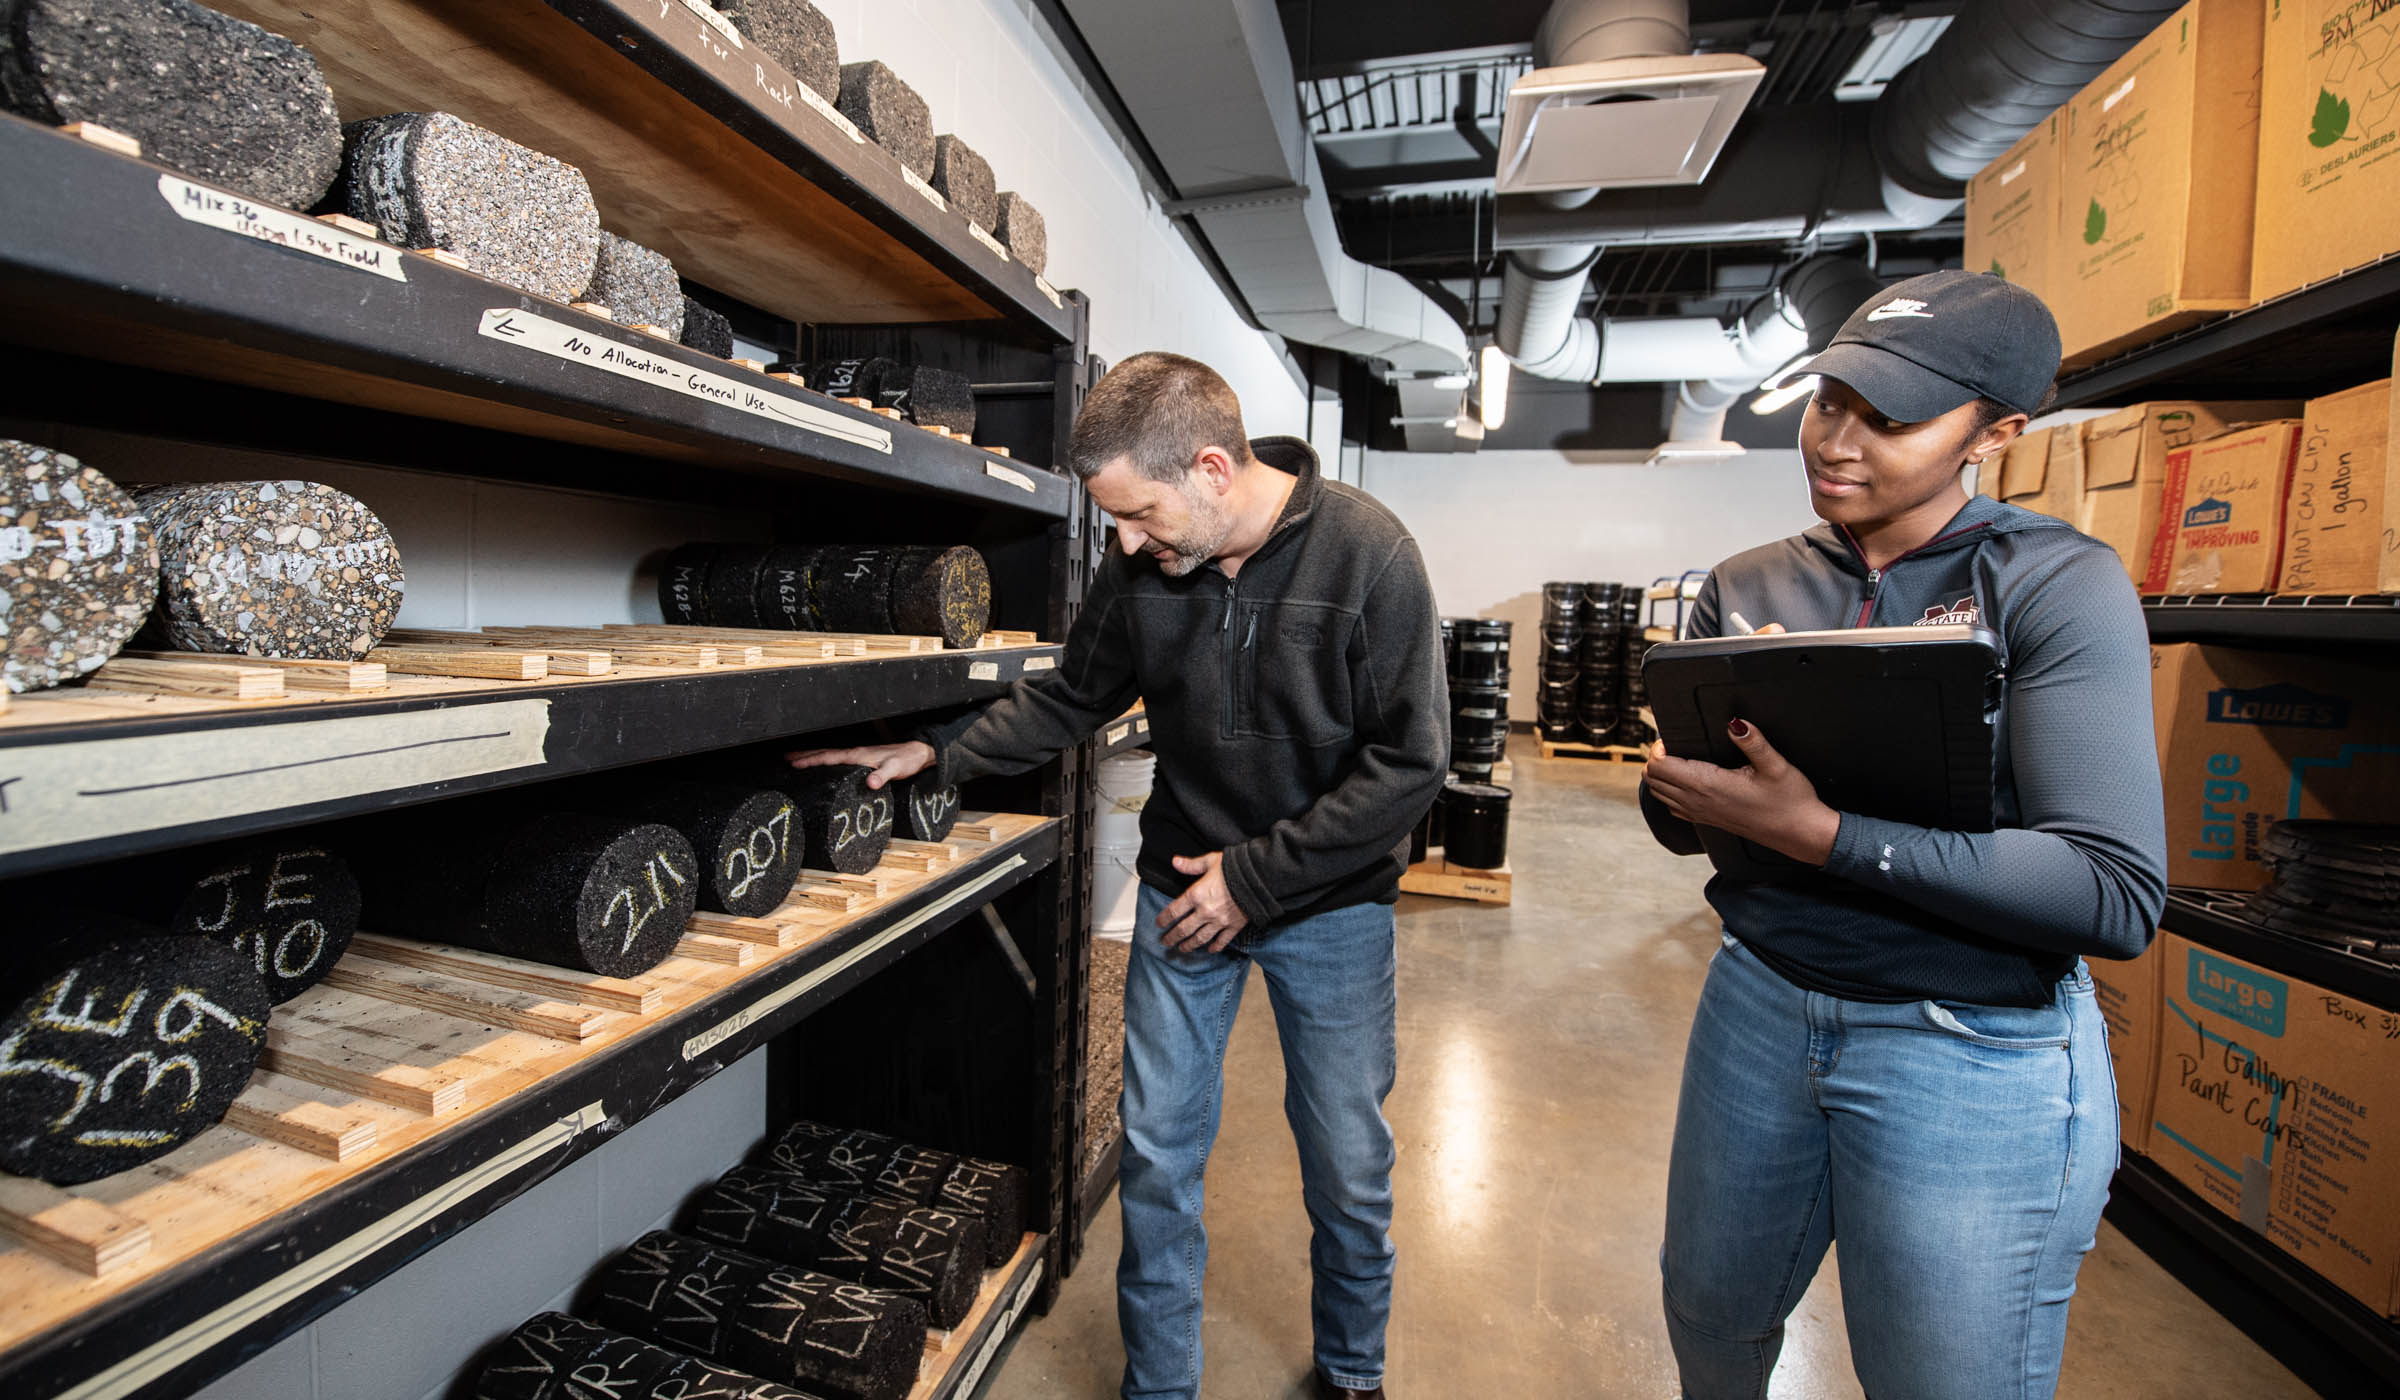 Civil Engineering Professor Isaac Howard and graduate student Jessica Lewis take note of asphalt research samples in Rula&#039;s materials storage room, which houses thousands of asphalt specimens of various ages.